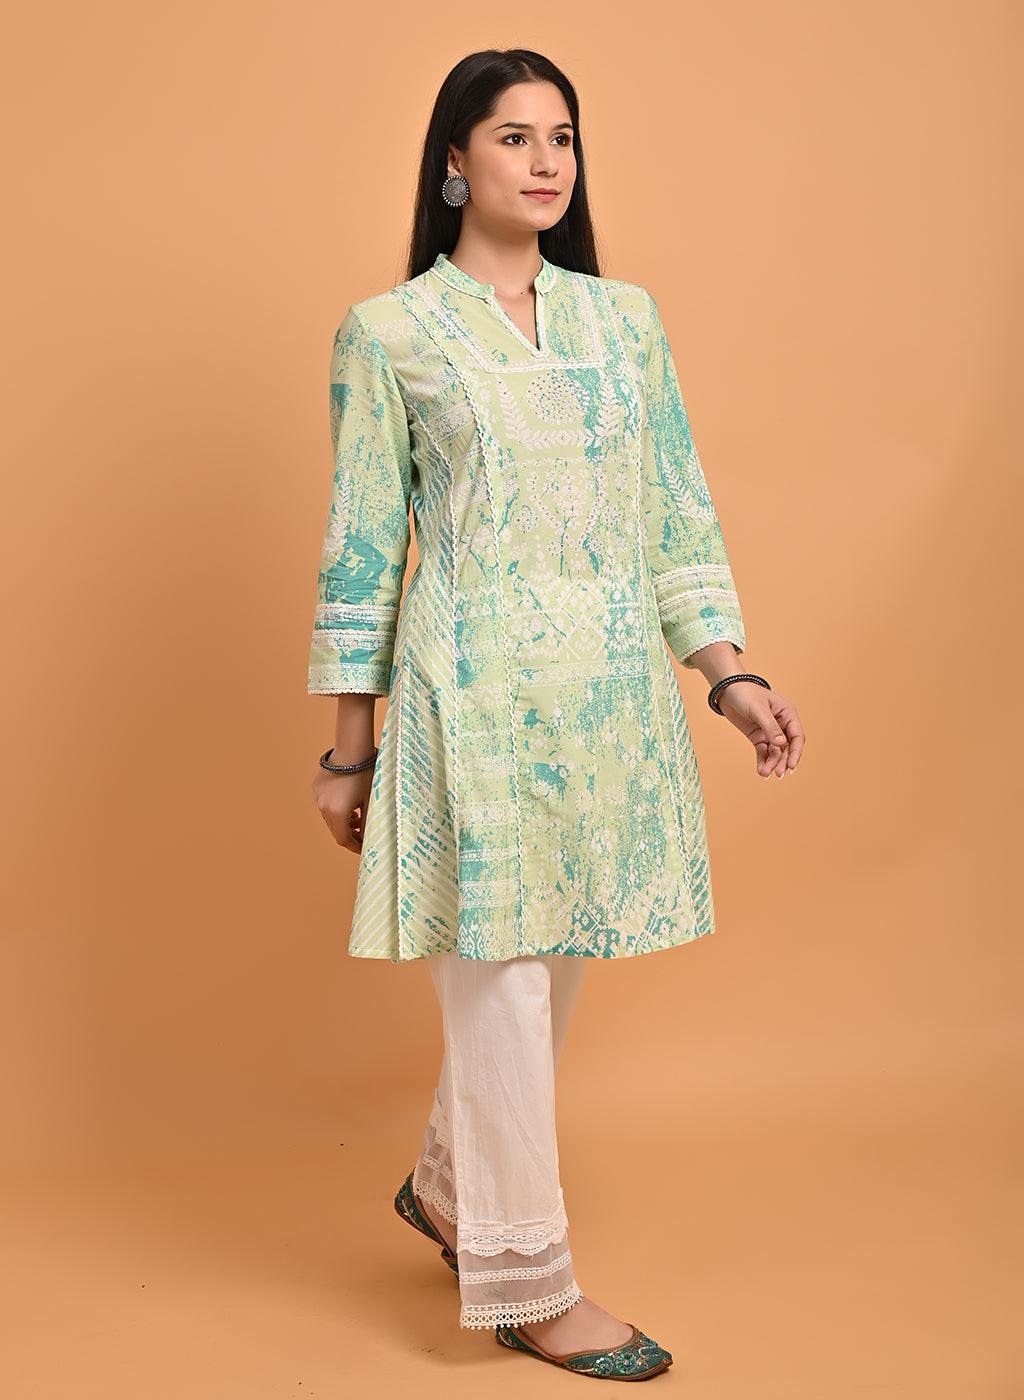 I am short in height, so which type of kurti is best for me? - Quora